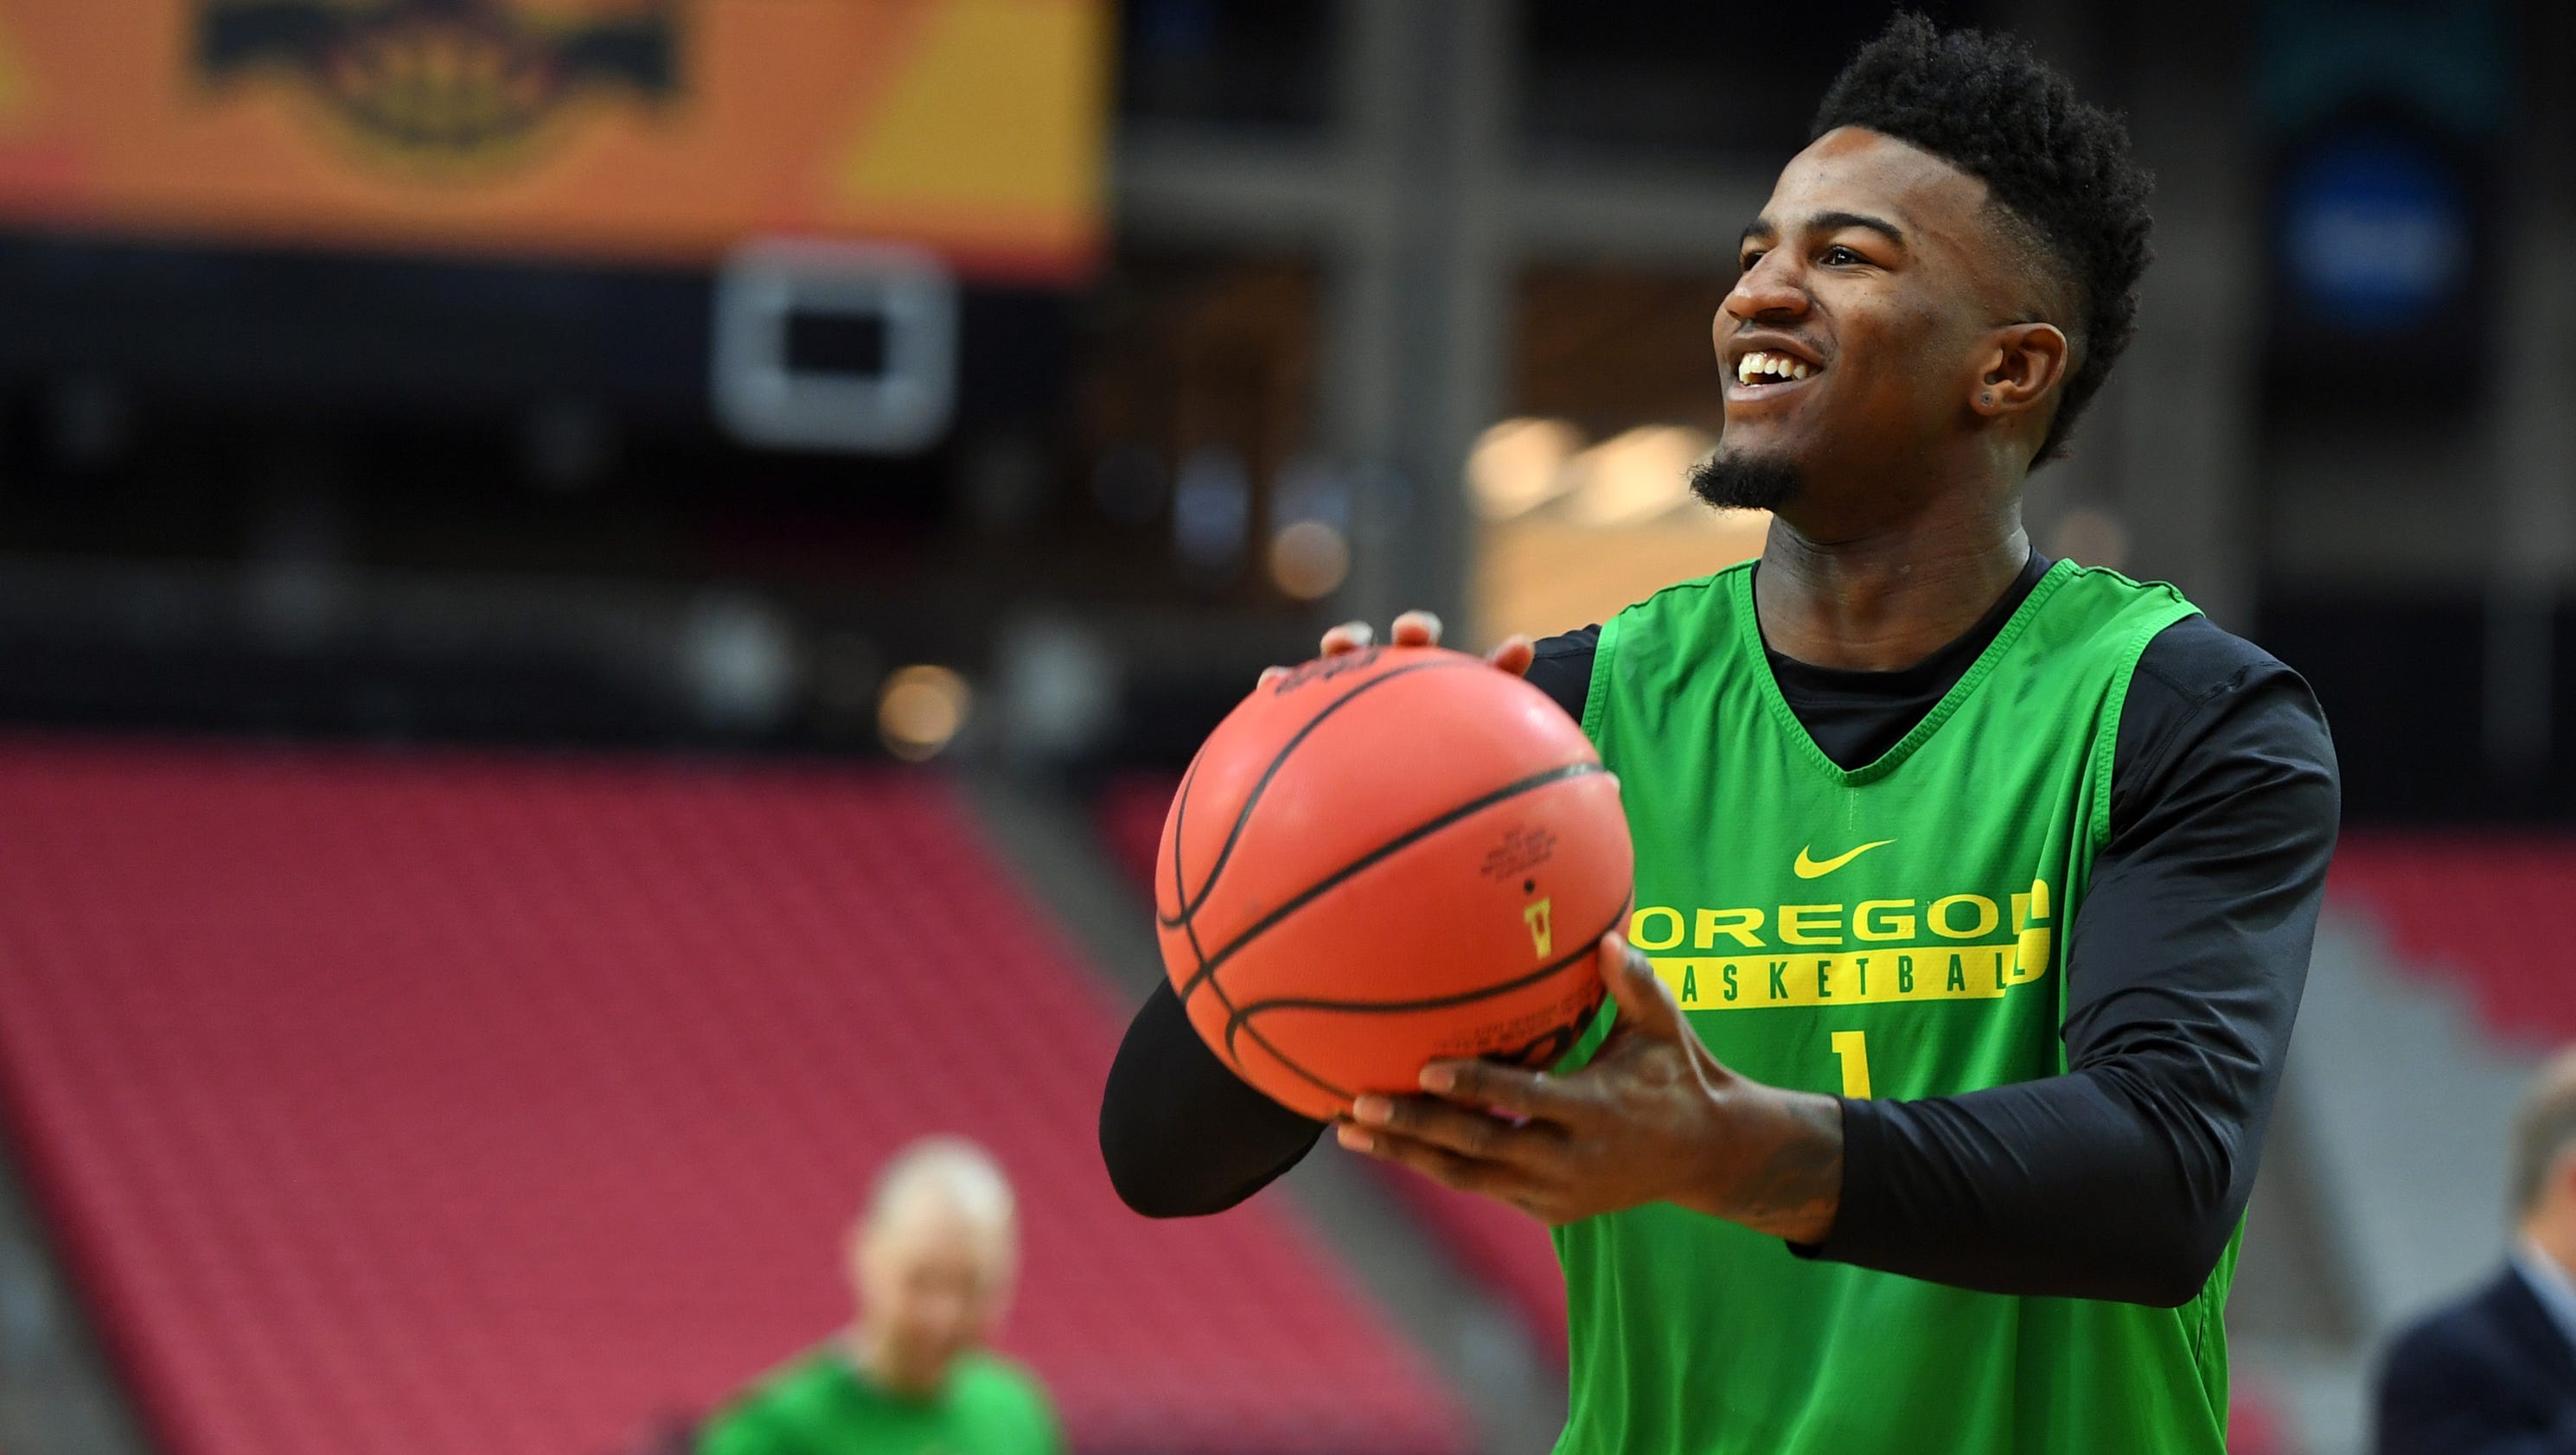 Jordan Bell is third Oregon Ducks player to declare for this year's NBA draft